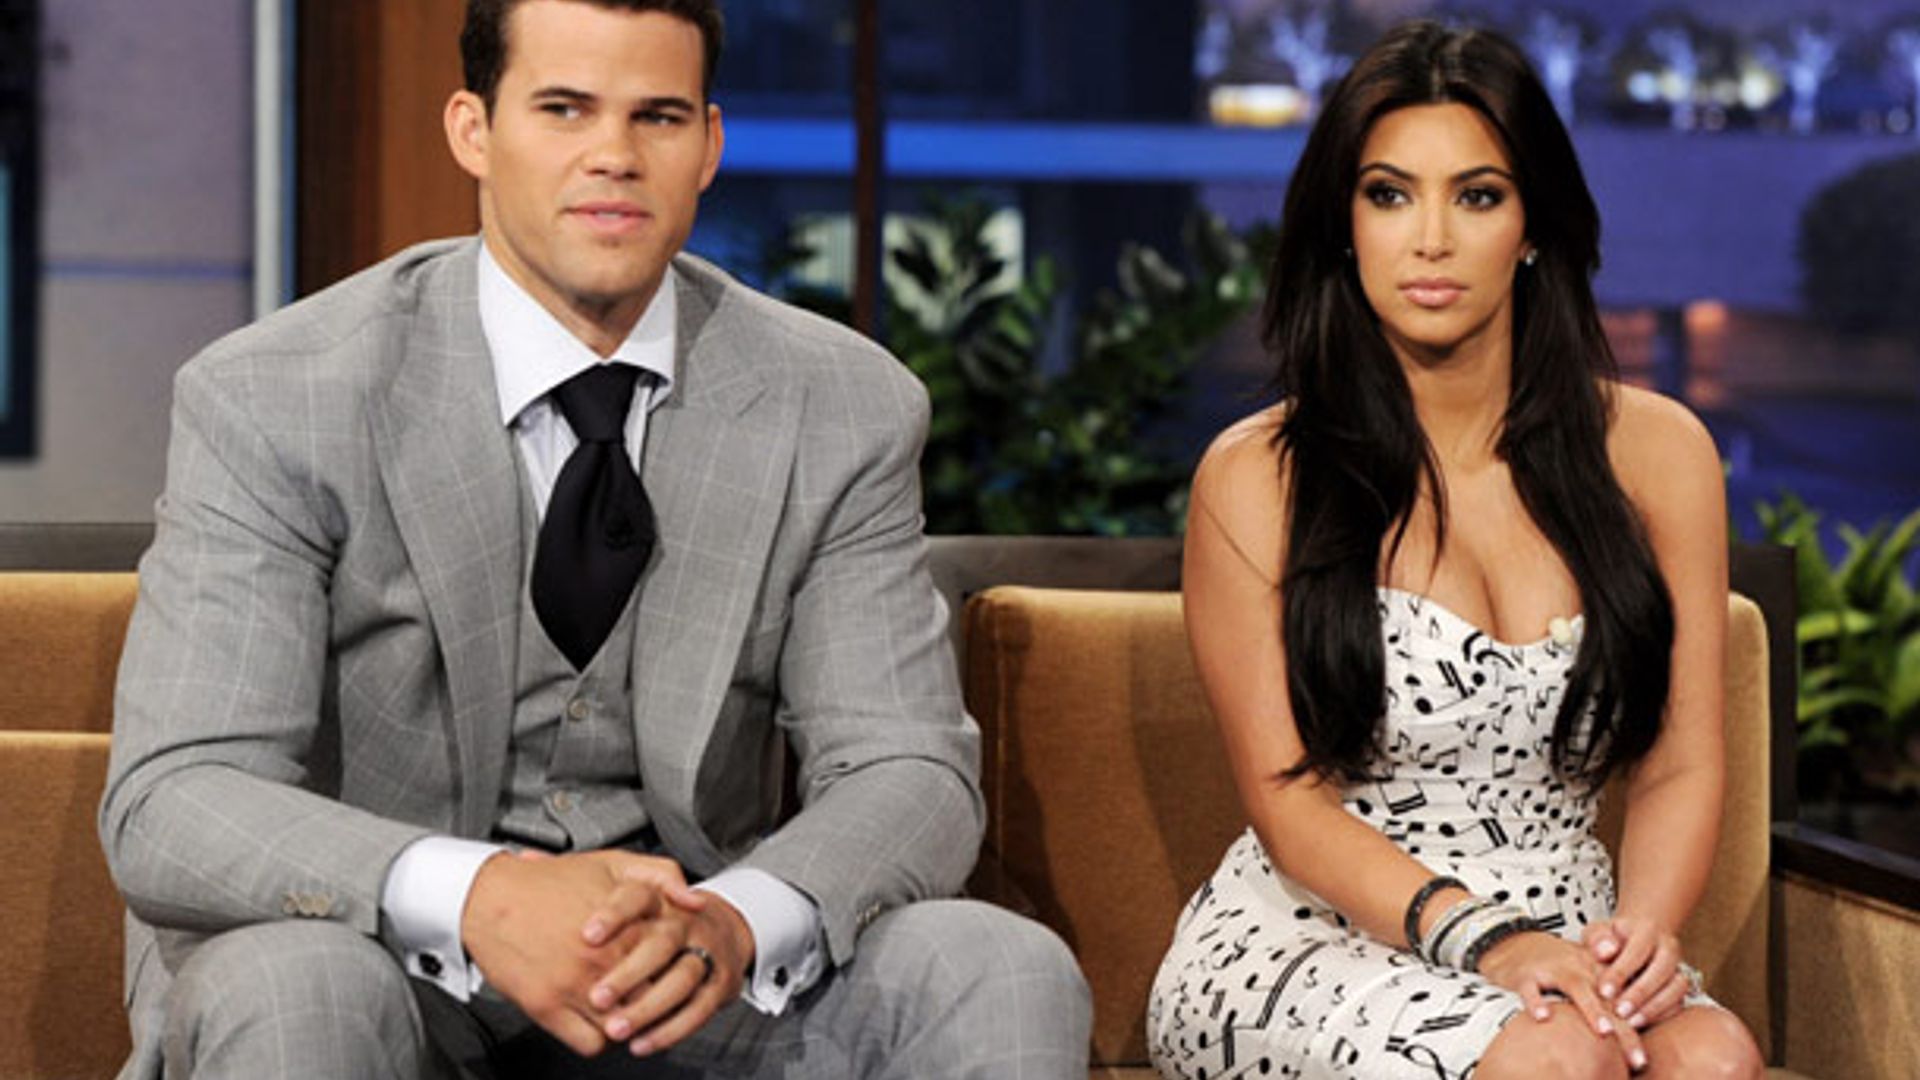 Kim Kardashian And Kris Humphries Are Divorced It Was Announced In La On Friday Hello 